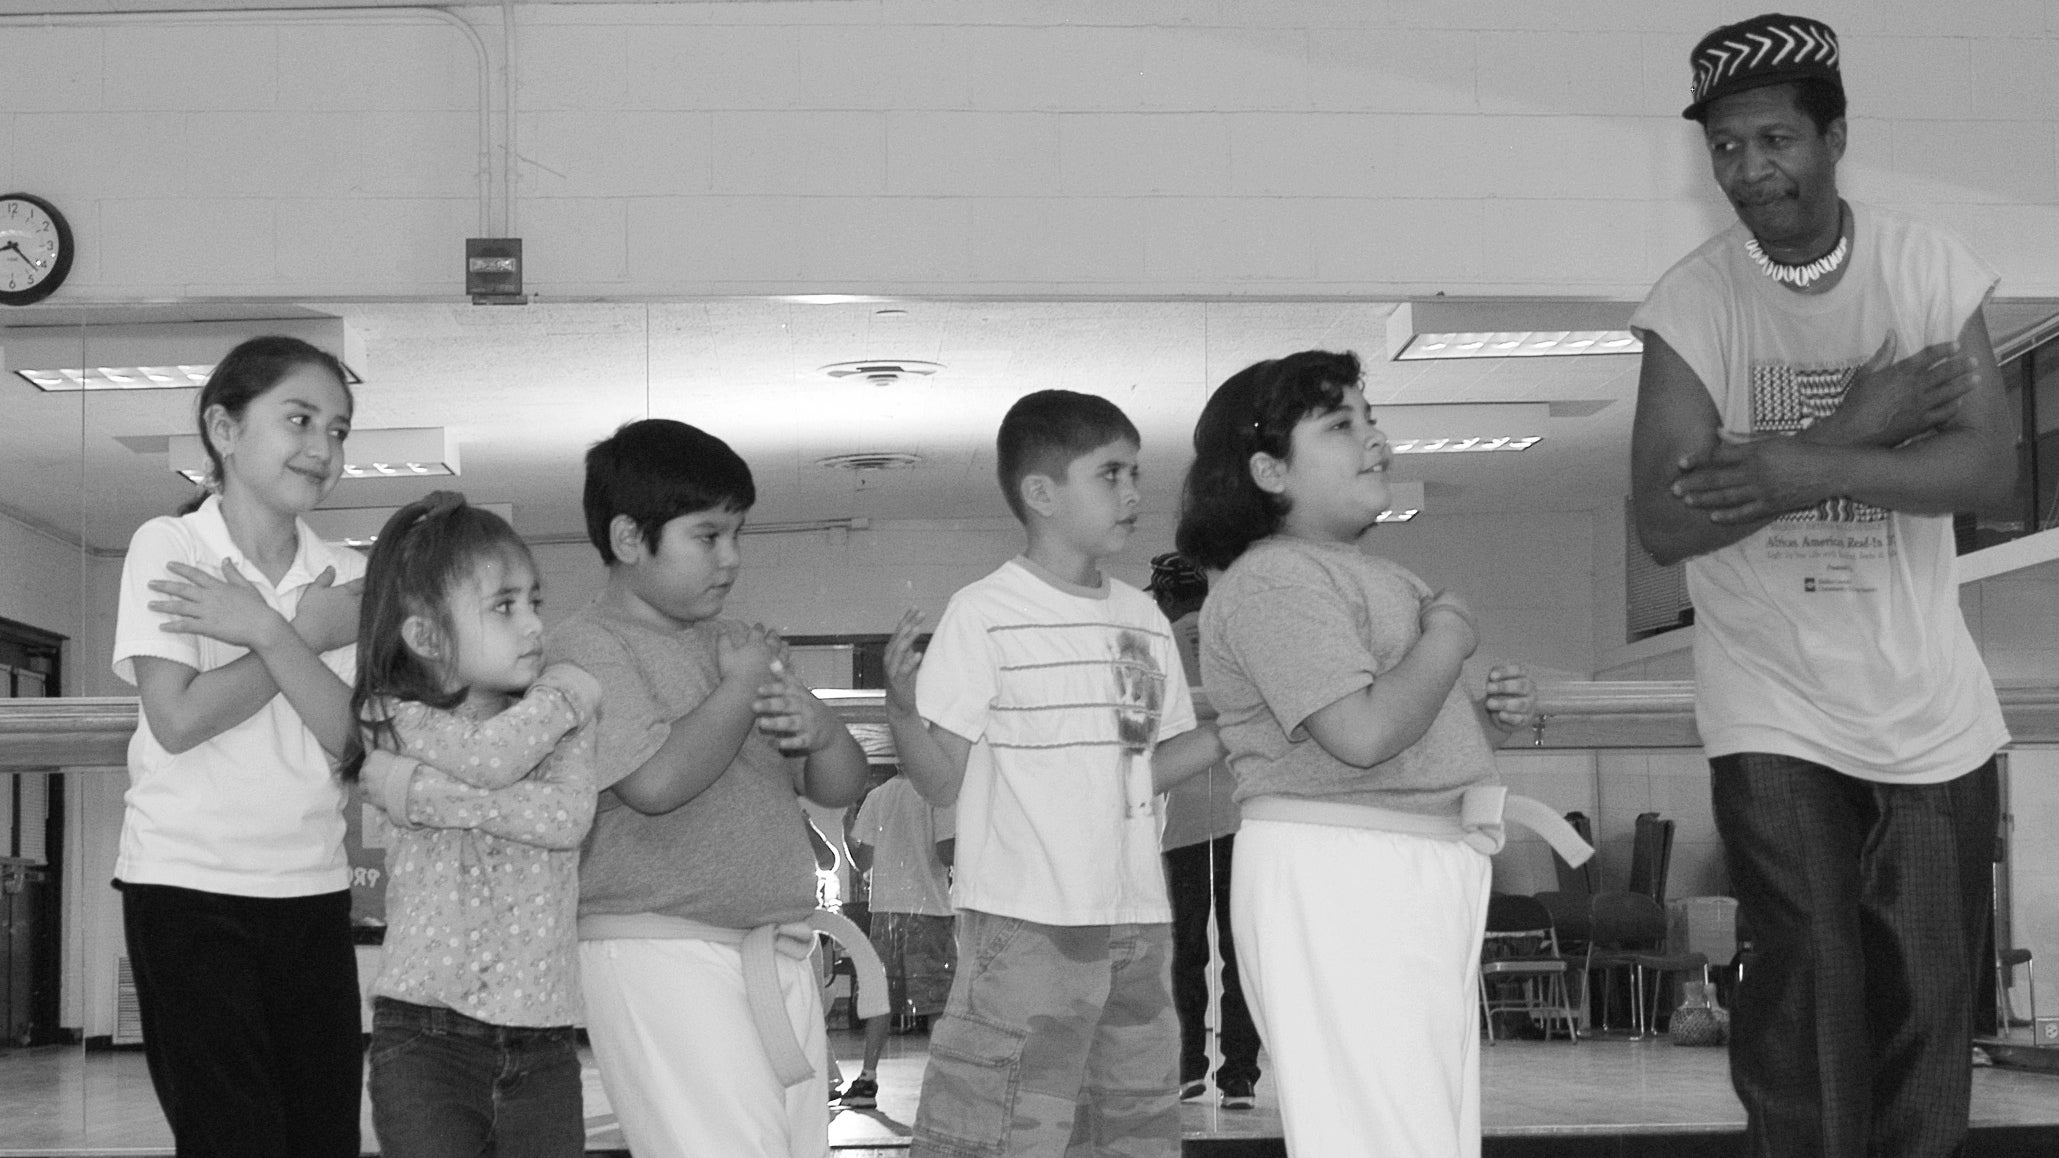 Musician-teacher Leo Hassan introduces his students to new dance steps.